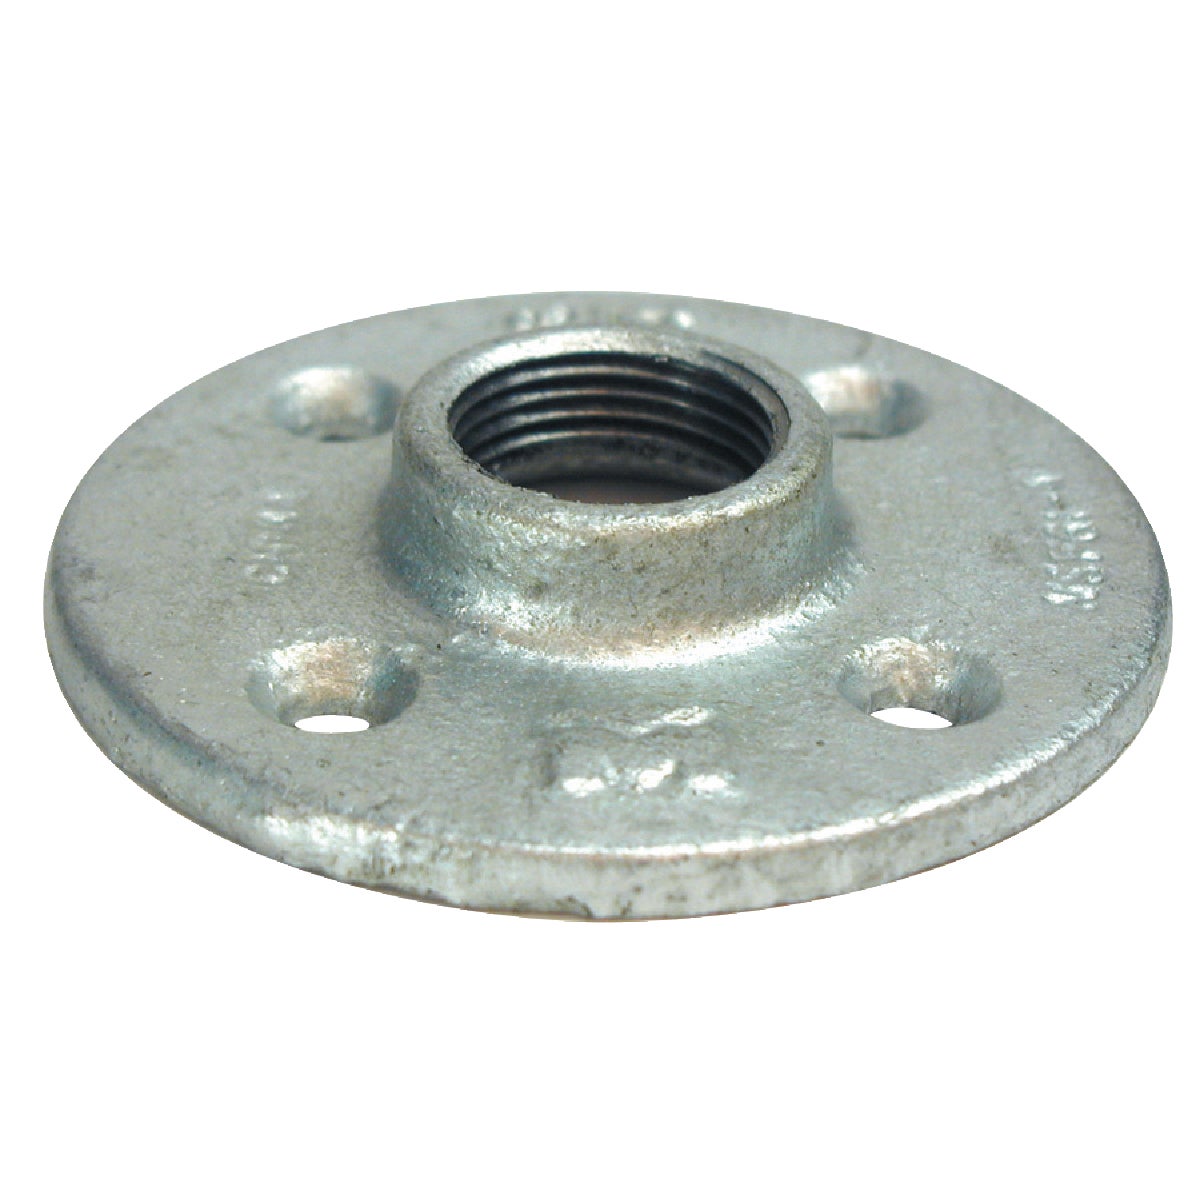 Southland 1/2 In. Malleable Iron Galvanized Floor Flange